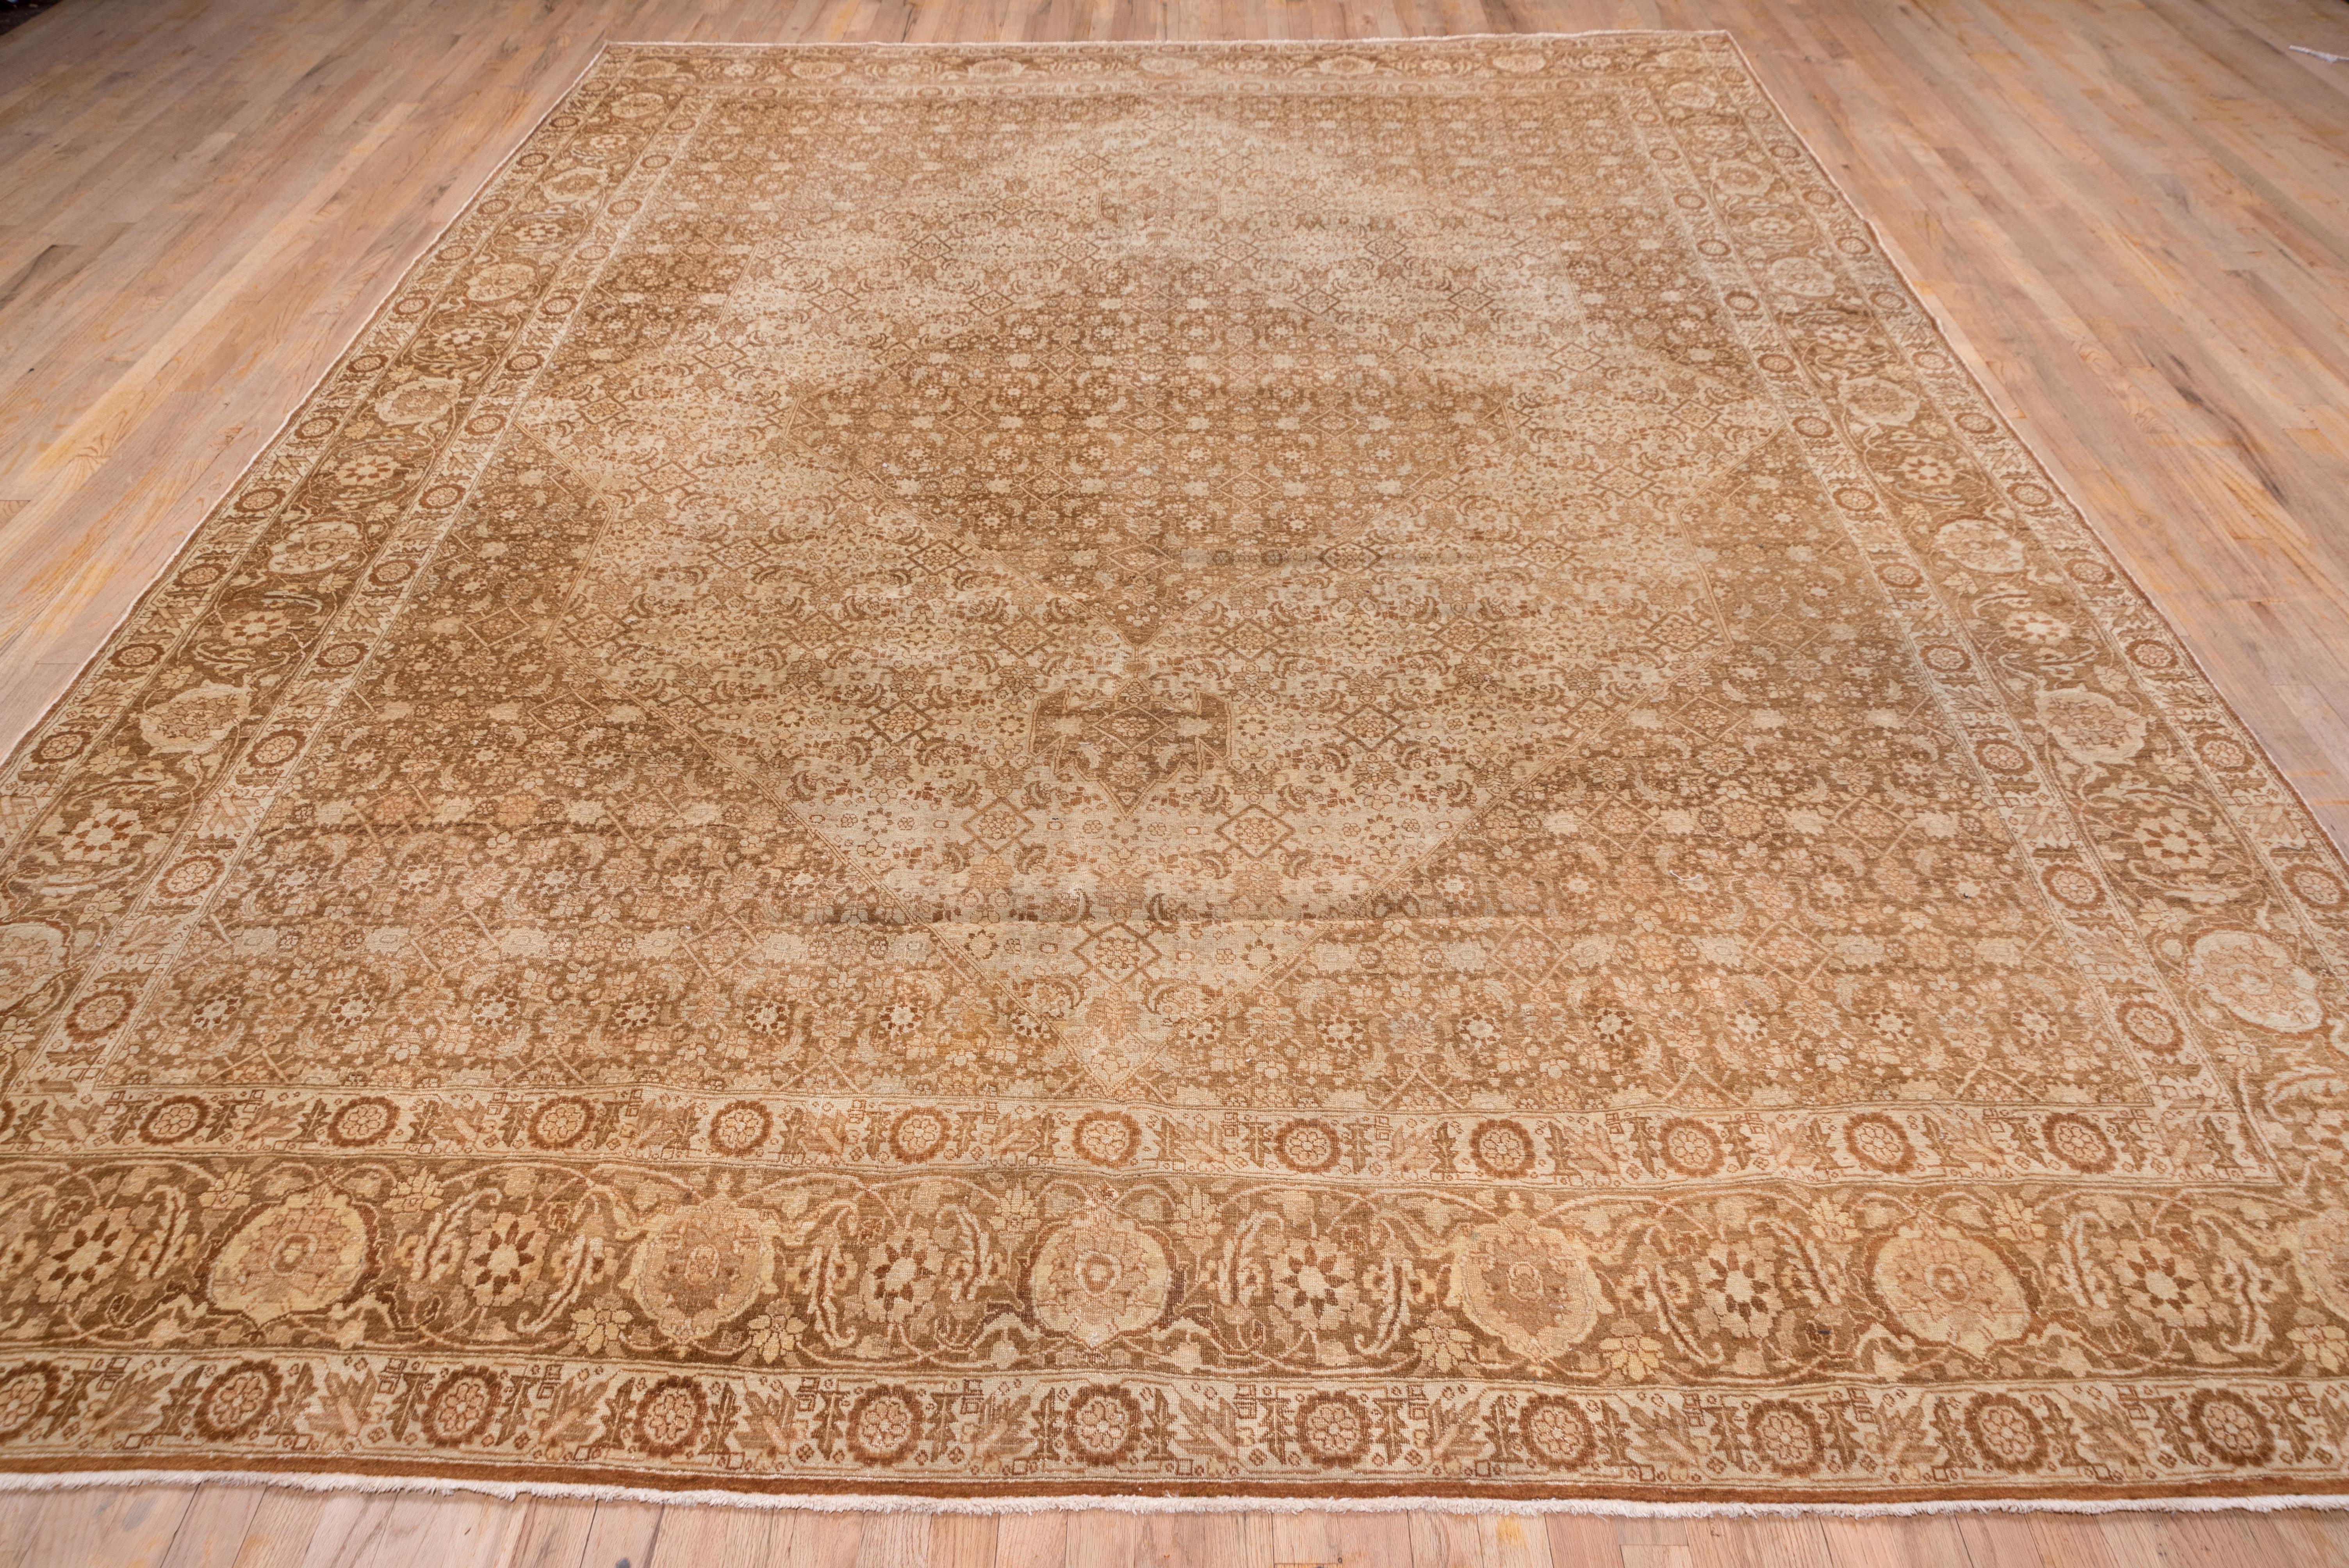 The rusty-brown layered 'book cover' field of this NW Persian town workshop carpet displays a dense, small figure Herati pattern within the Classic accompaniment of a turtle palmette and 'fish' leaf rust-brown main border and ivory Zanbaki pattern